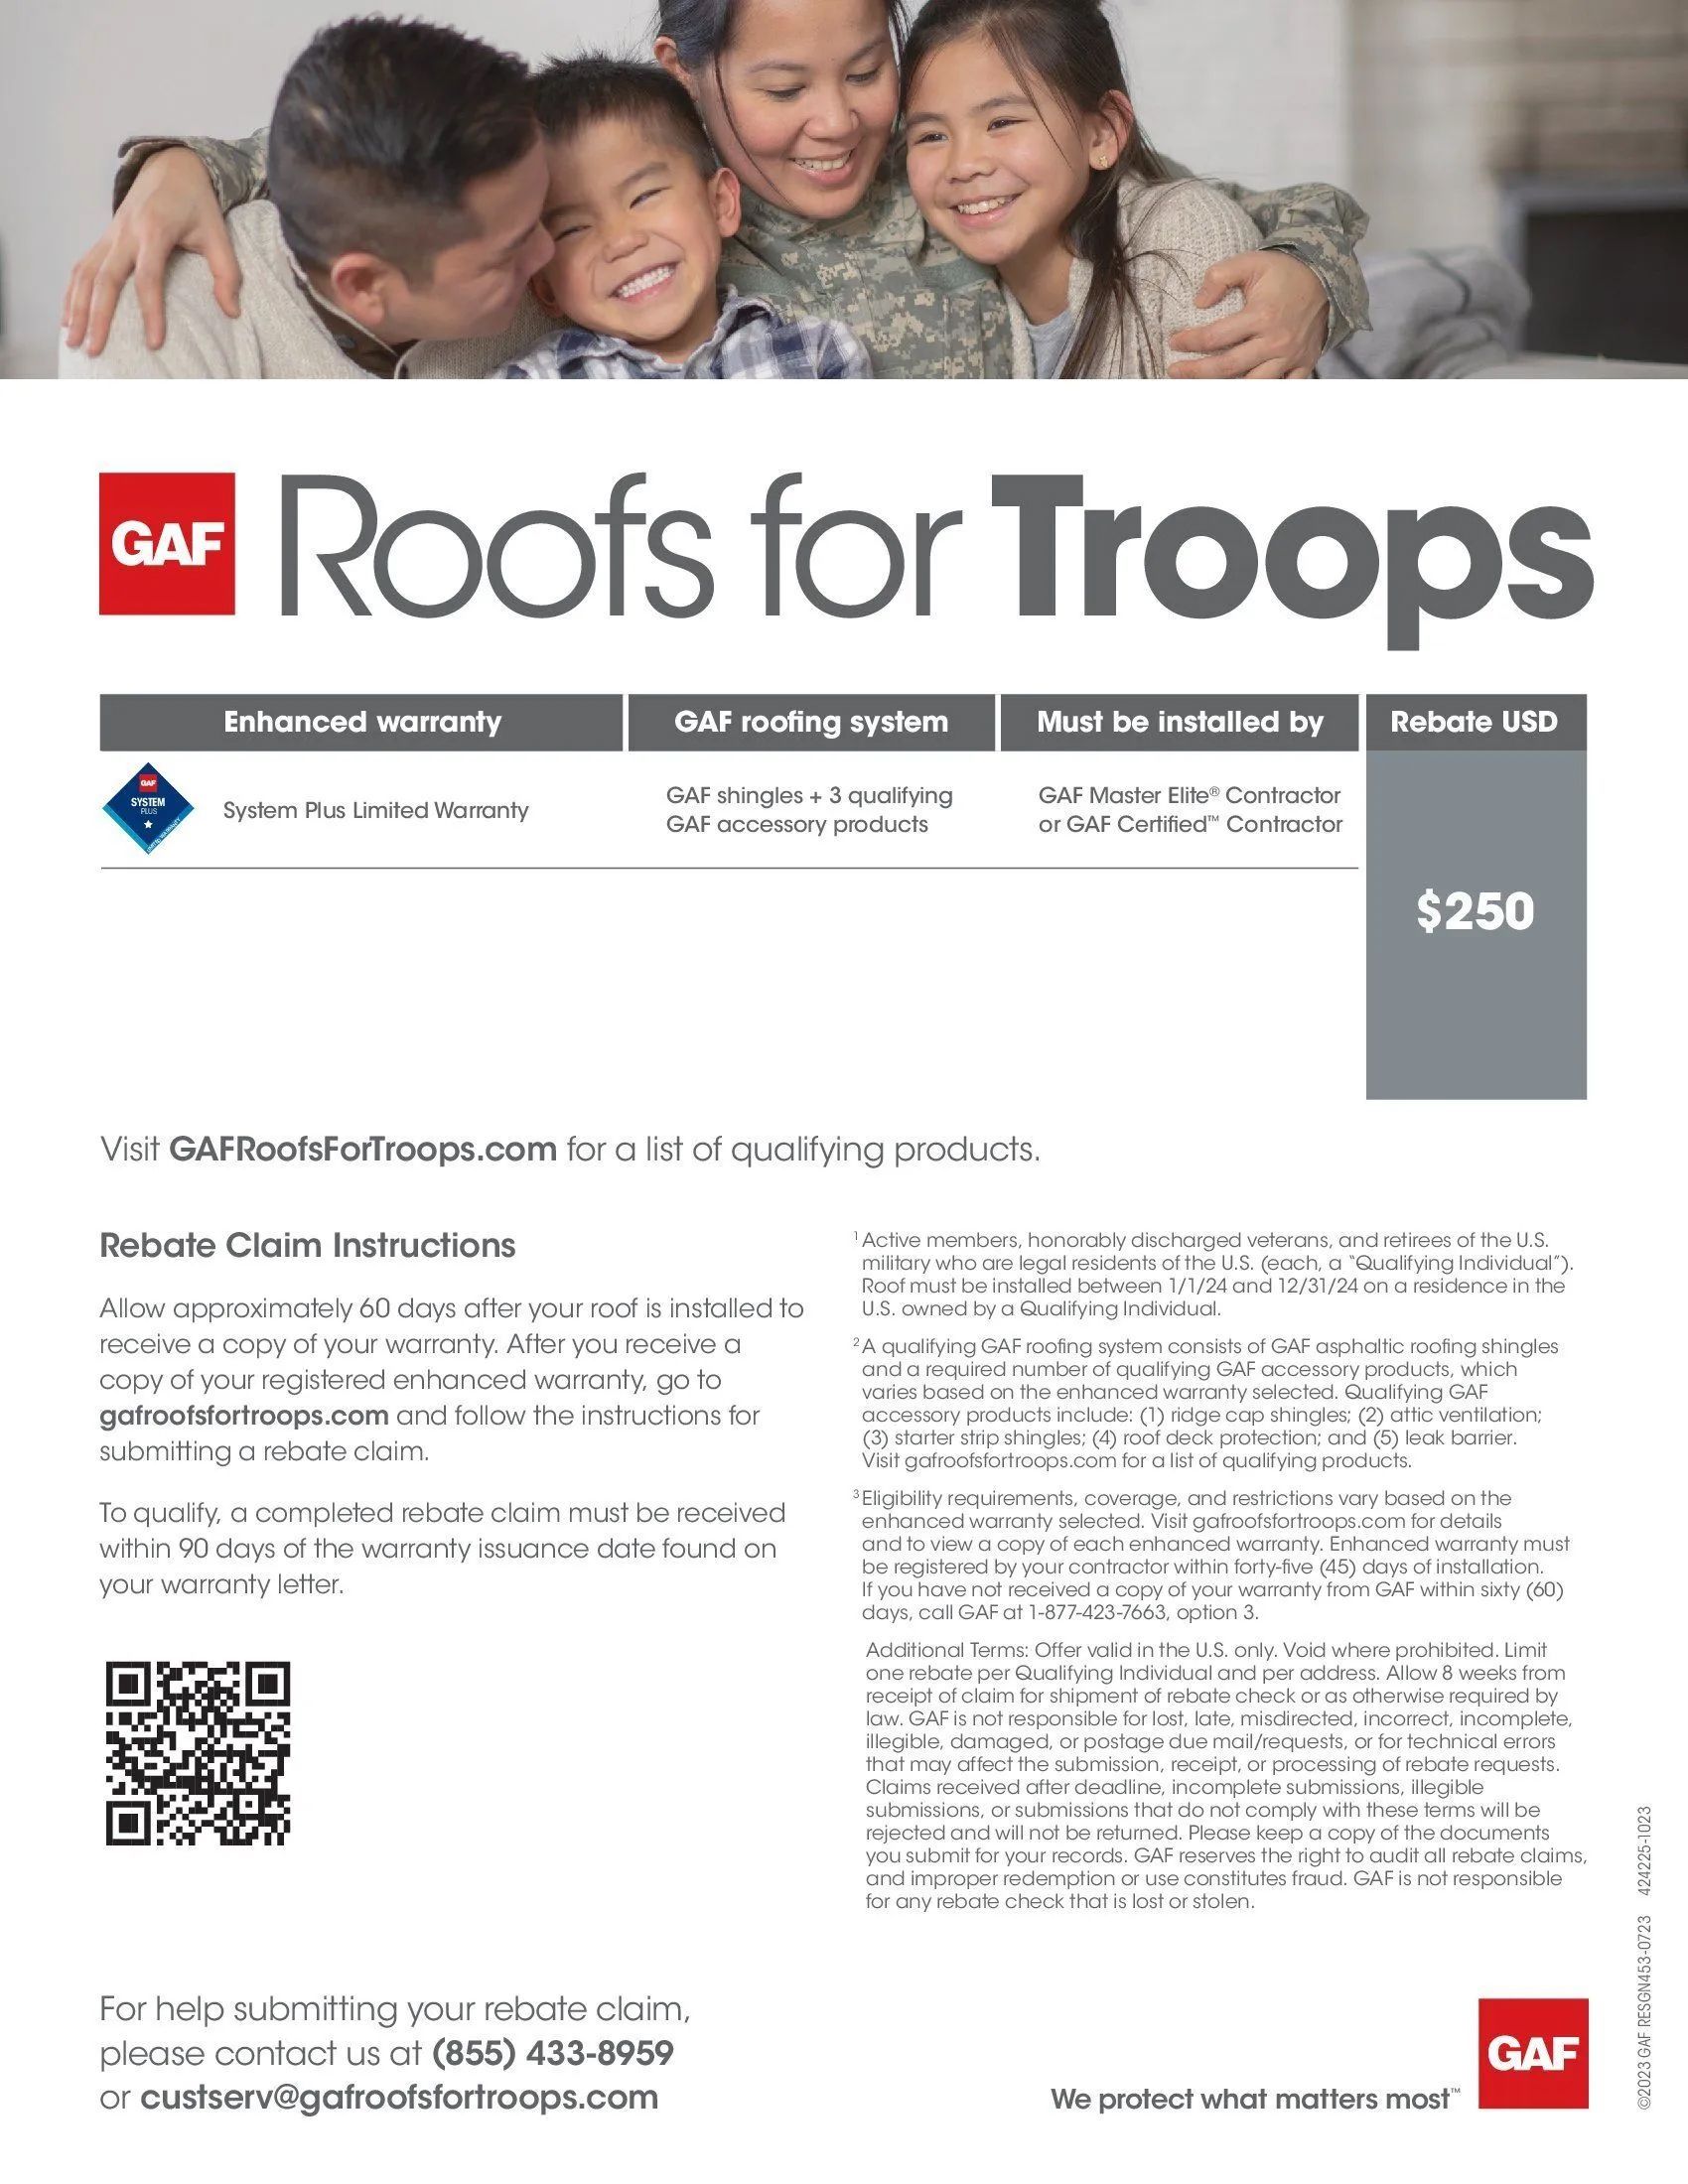 english--details-roofs for troops